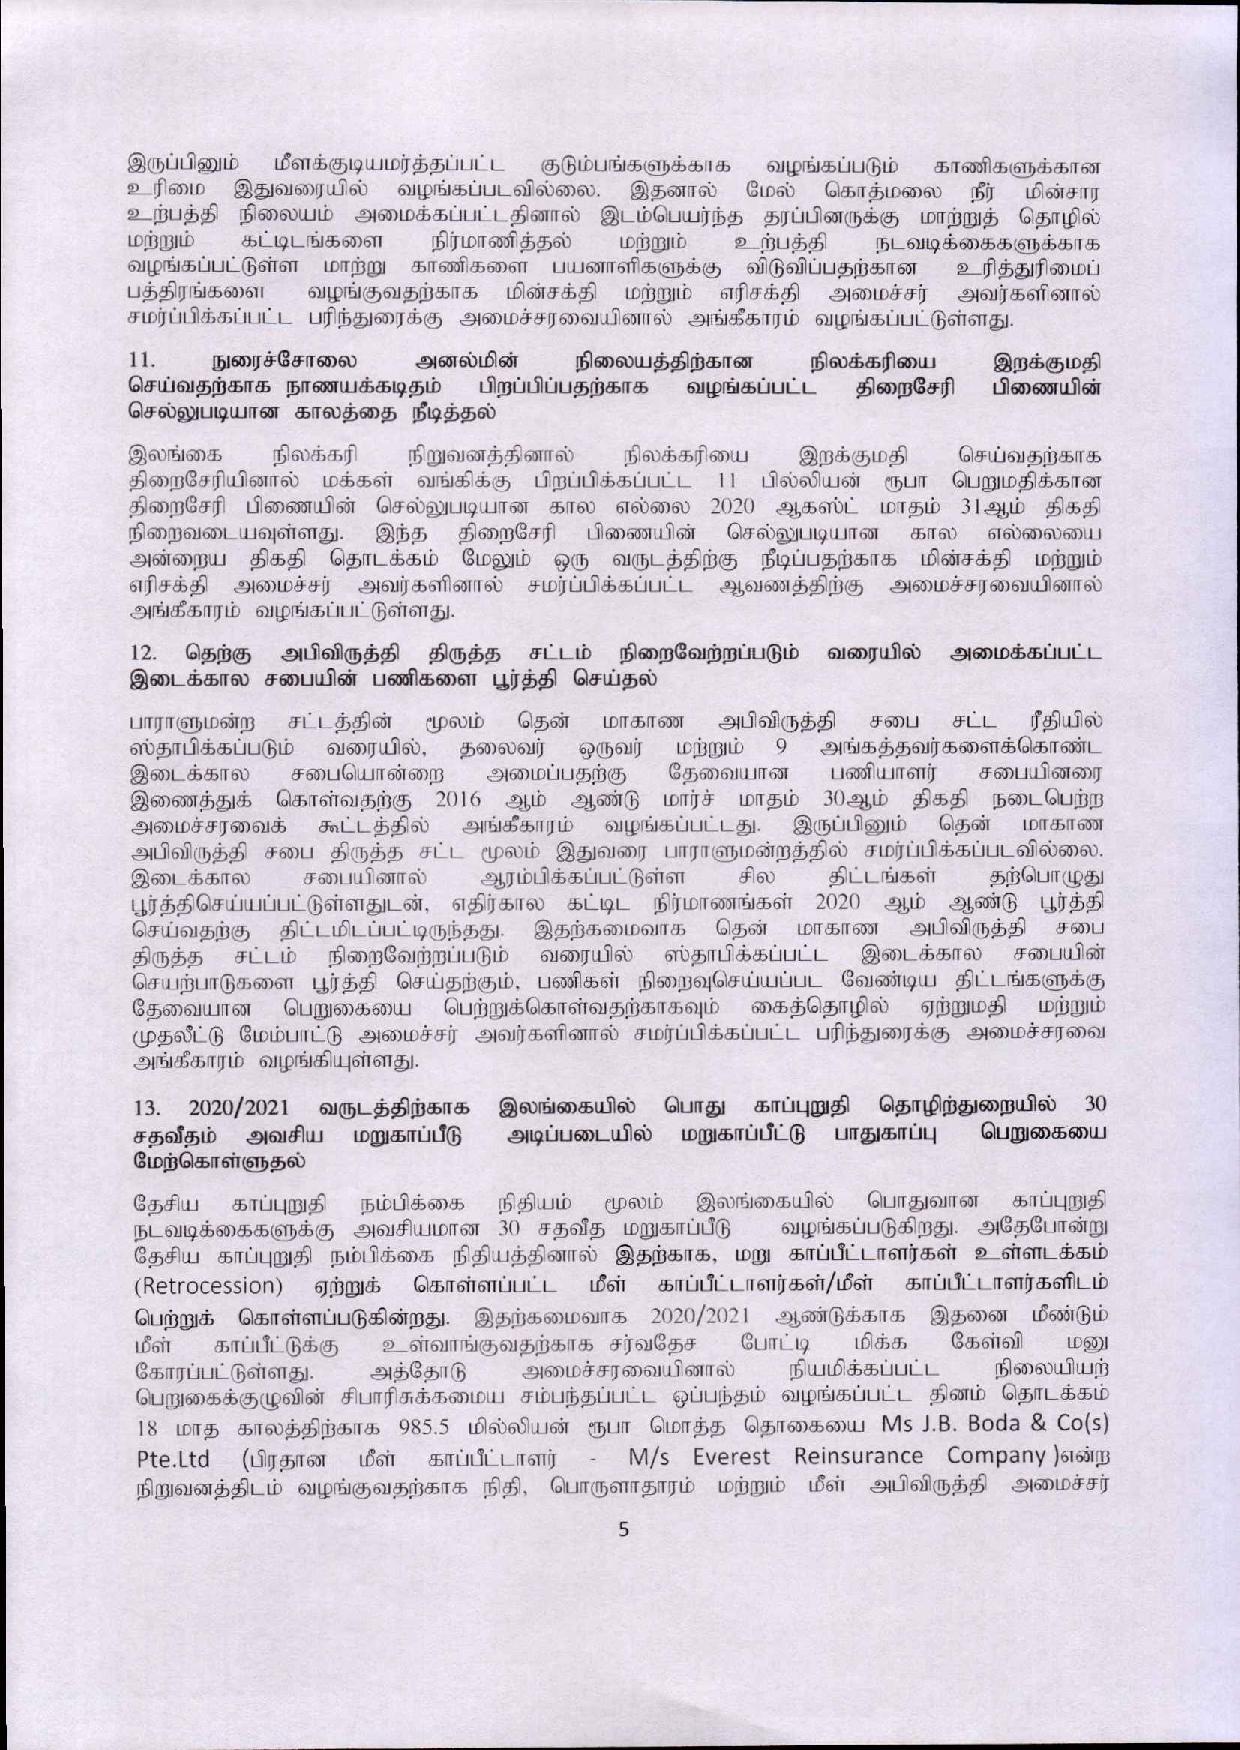 Cabinet Decision on 22.07.2020 Tamil page 005 1